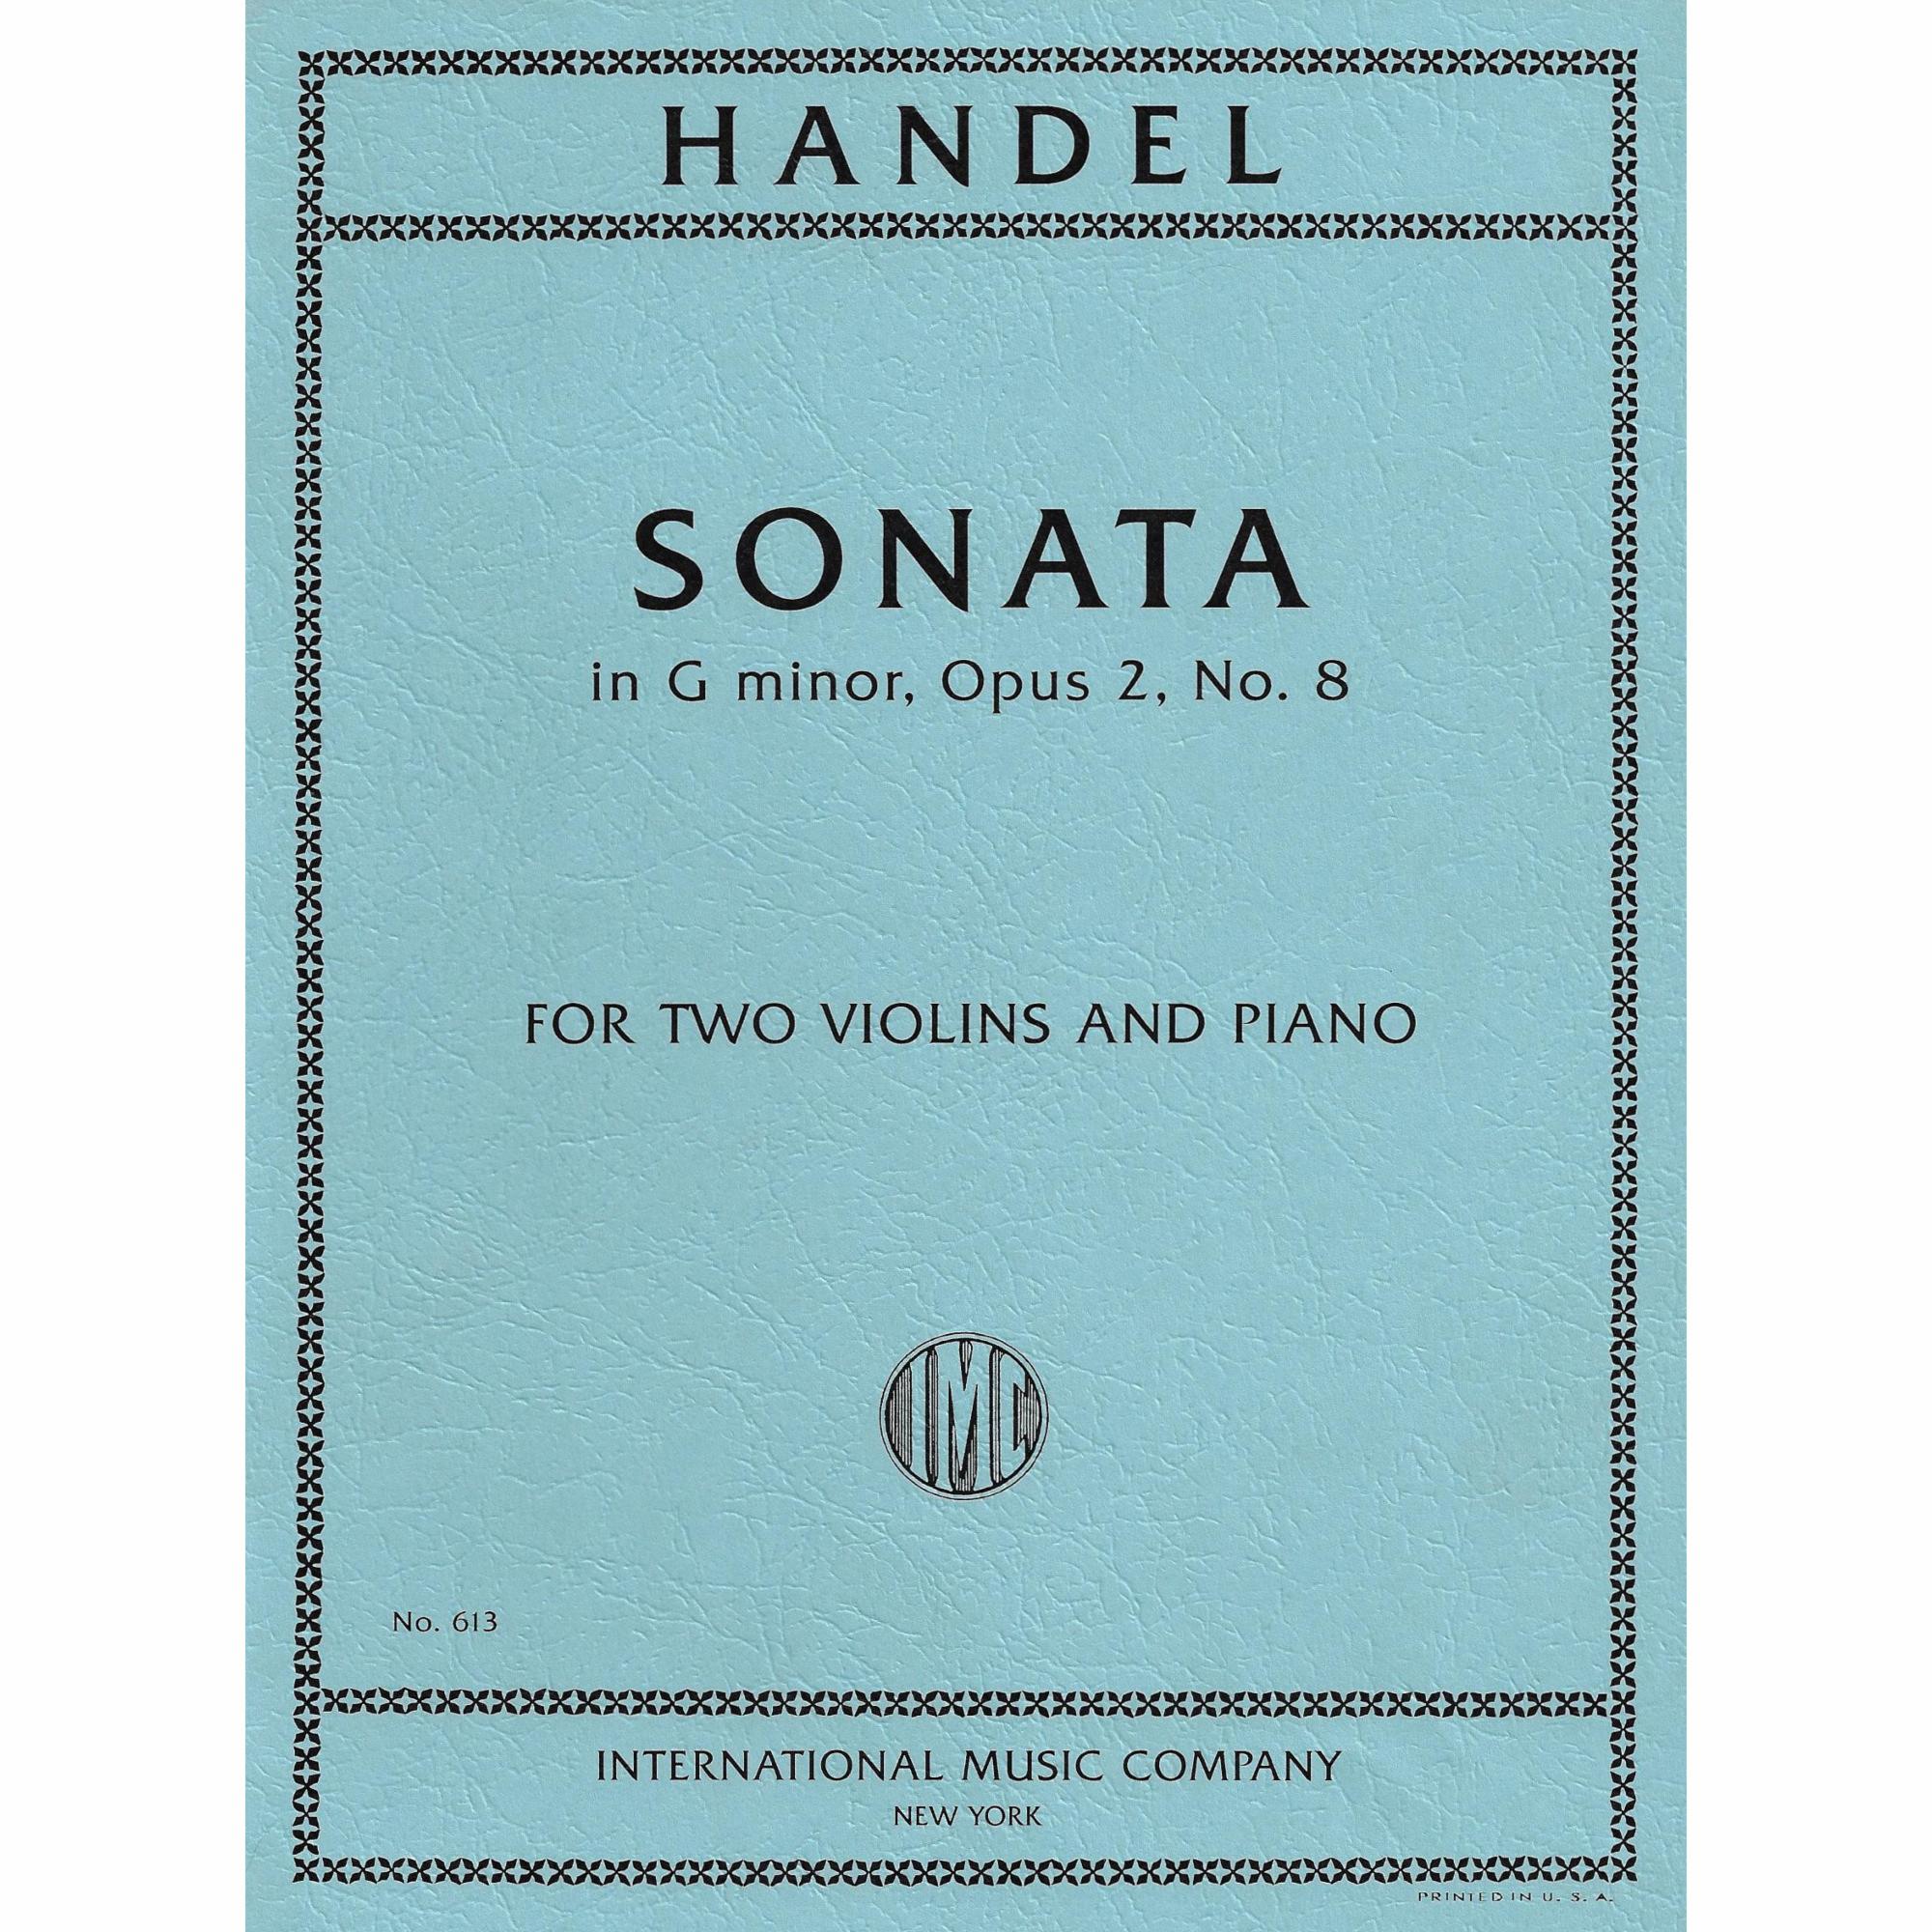 Handel -- Sonata in G Minor, Op. 2, No. 8 for Two Violins and Piano